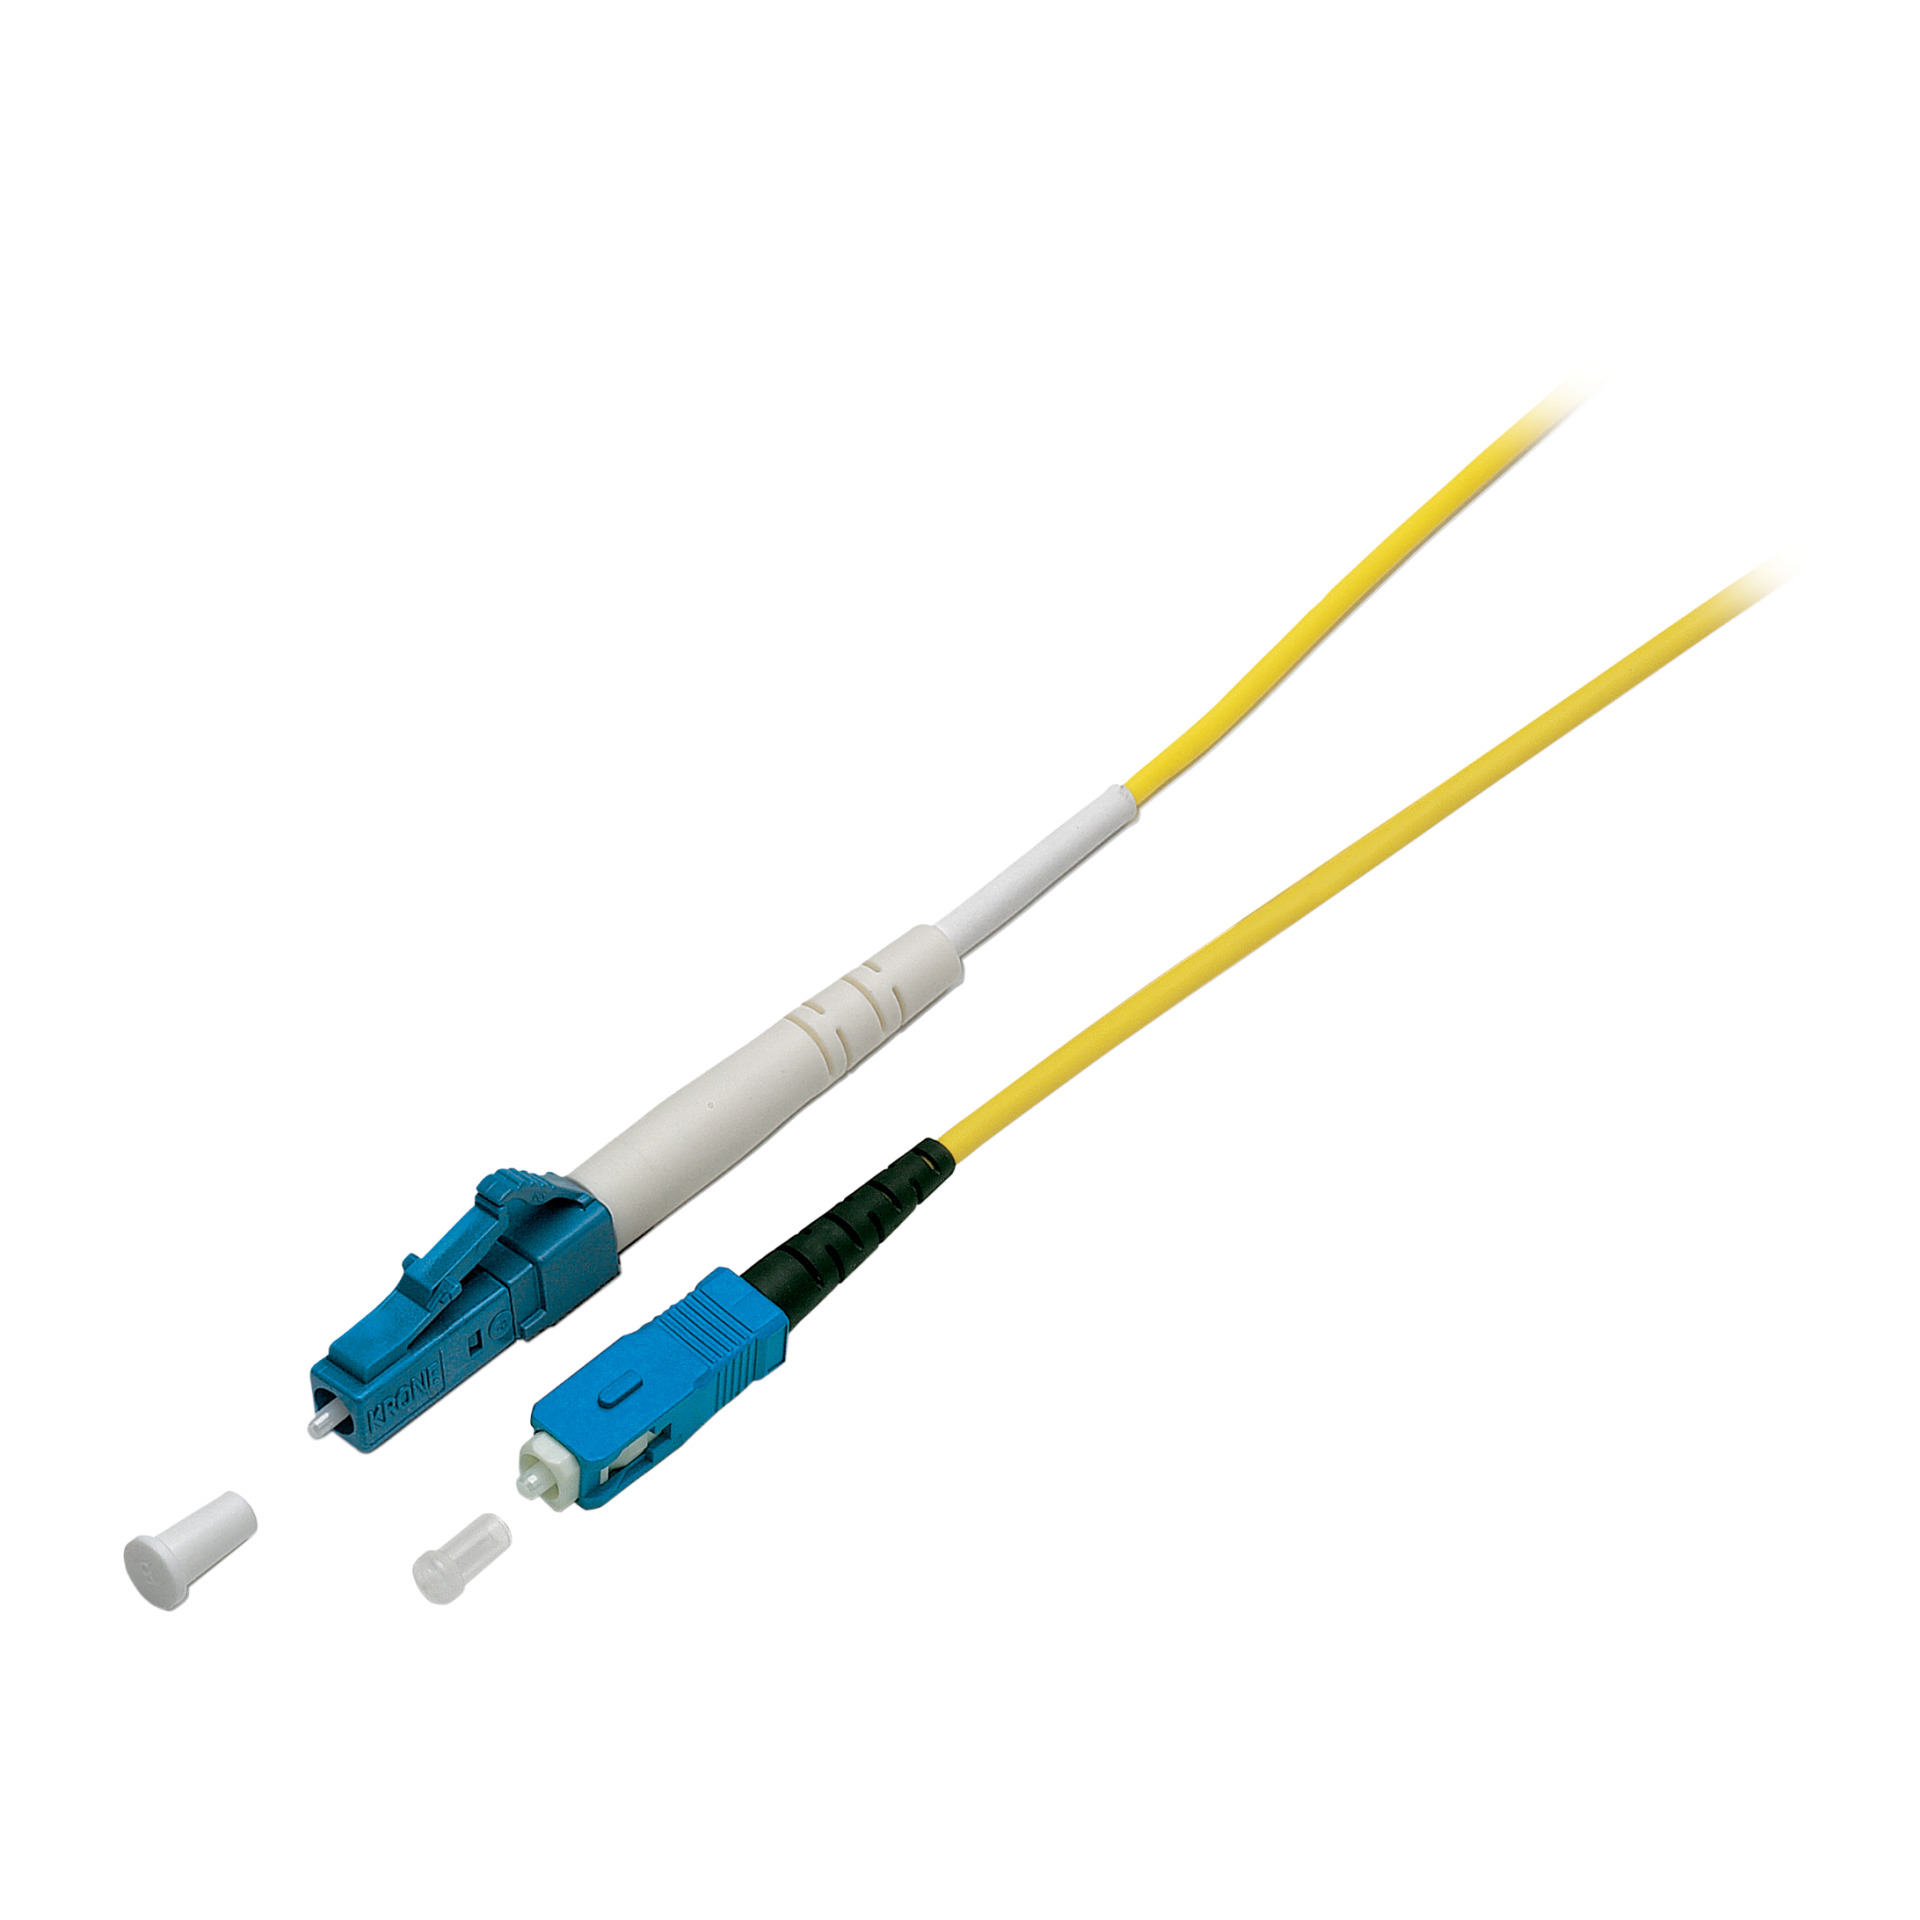 Simplex FO Patch Cable LC-SC G657.A2 2m 2,0mm yellow 9/125µm